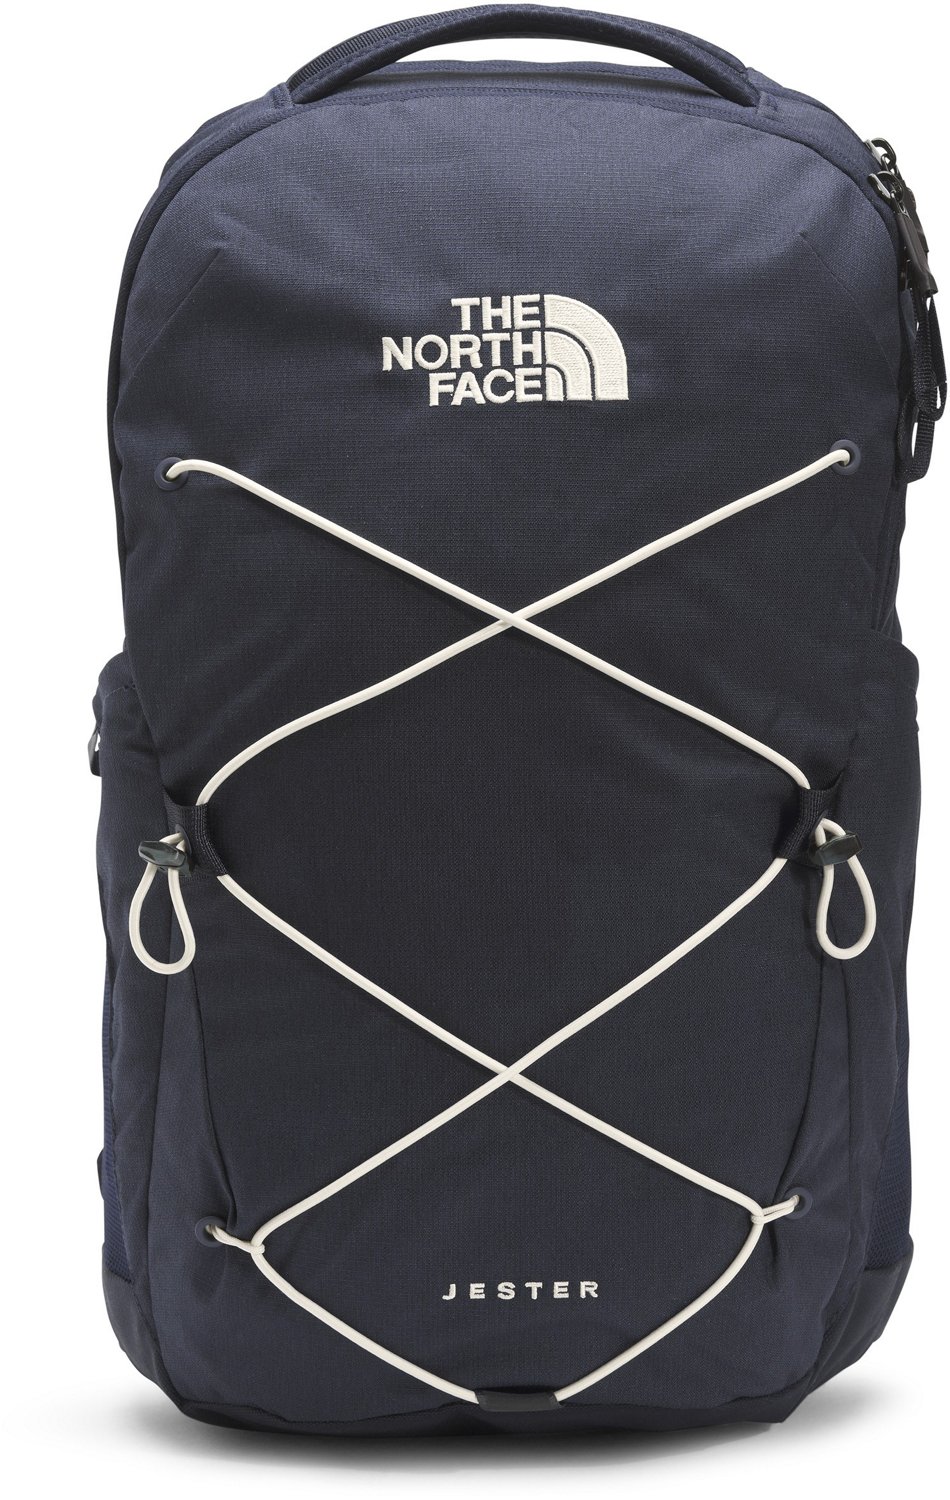 The North Face Men S Jester Backpack Academy